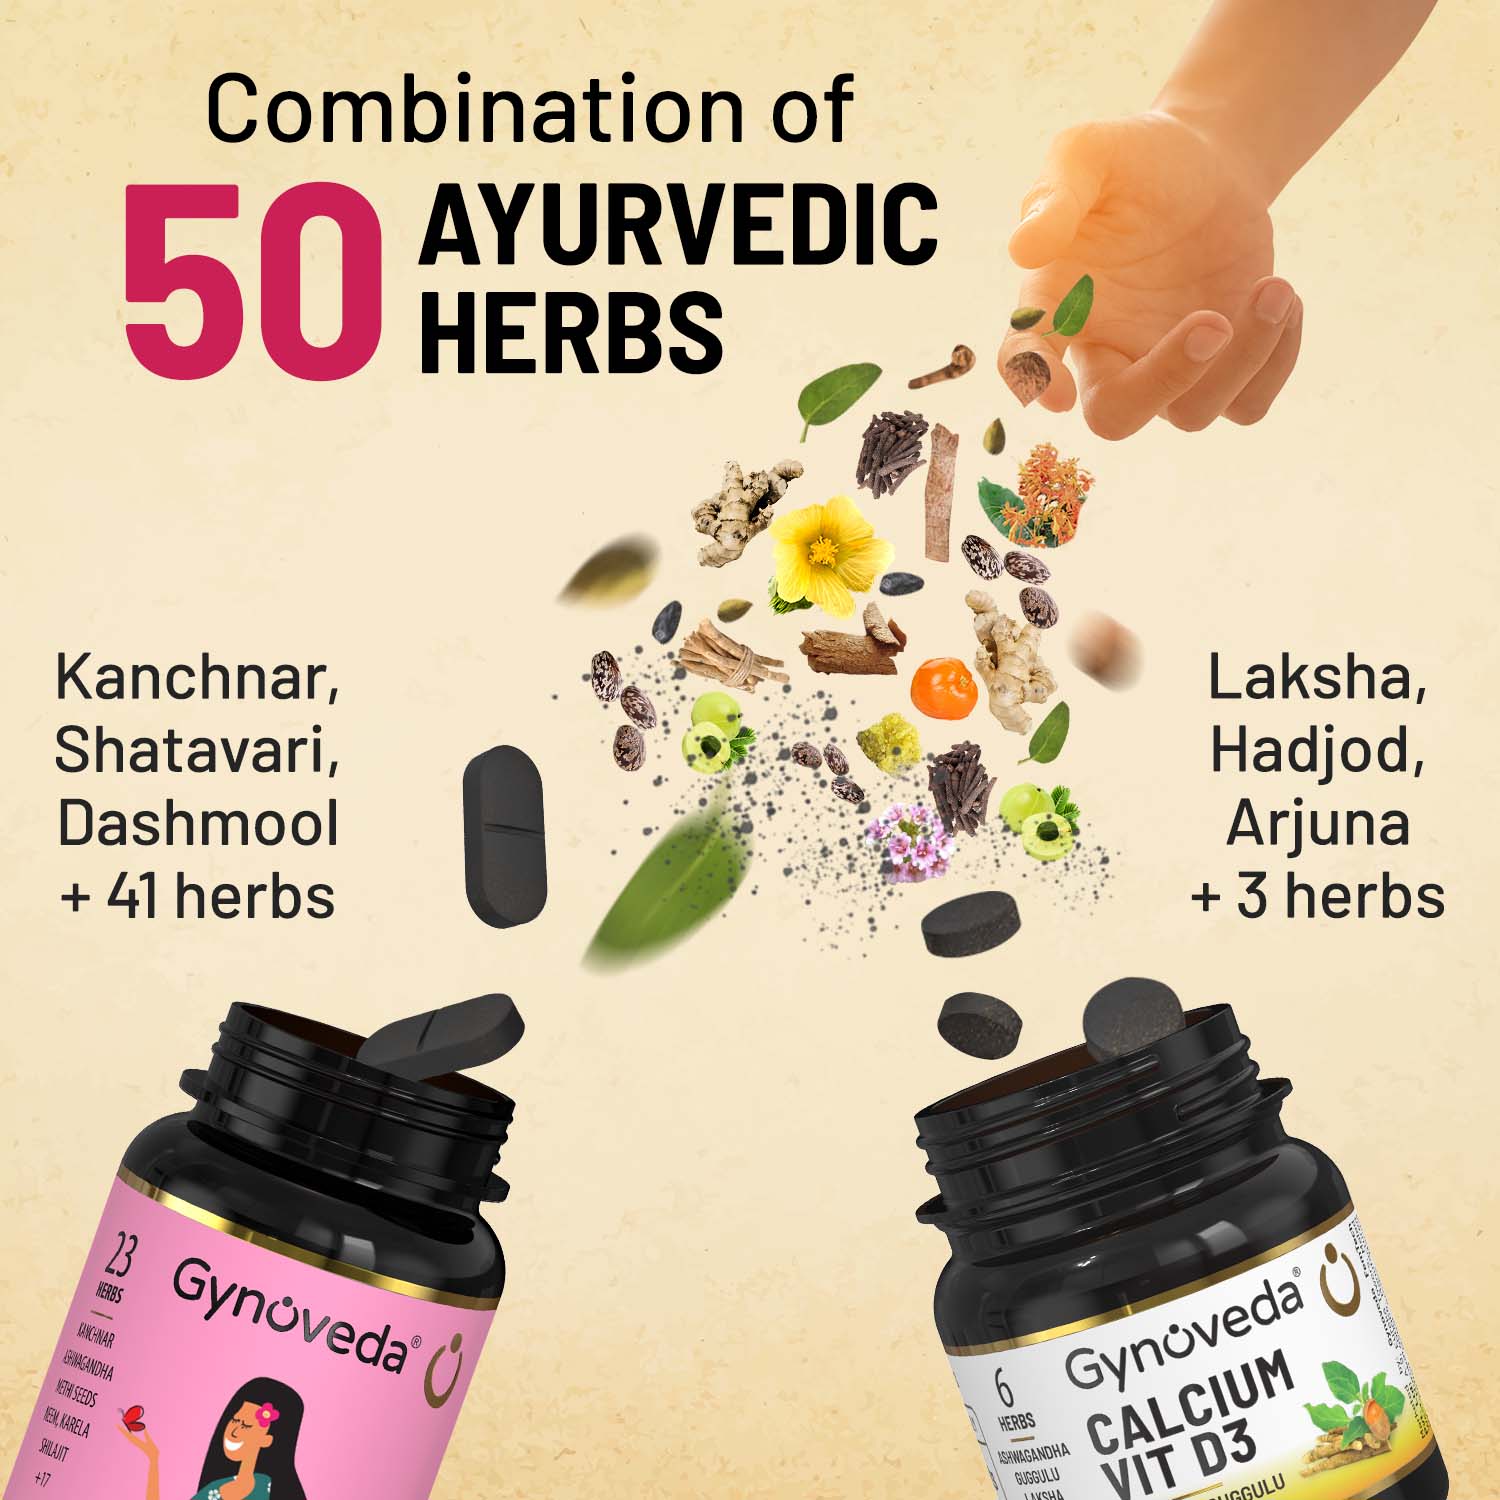 Ayurveda for Freedom from PCOS & Healthy Bones